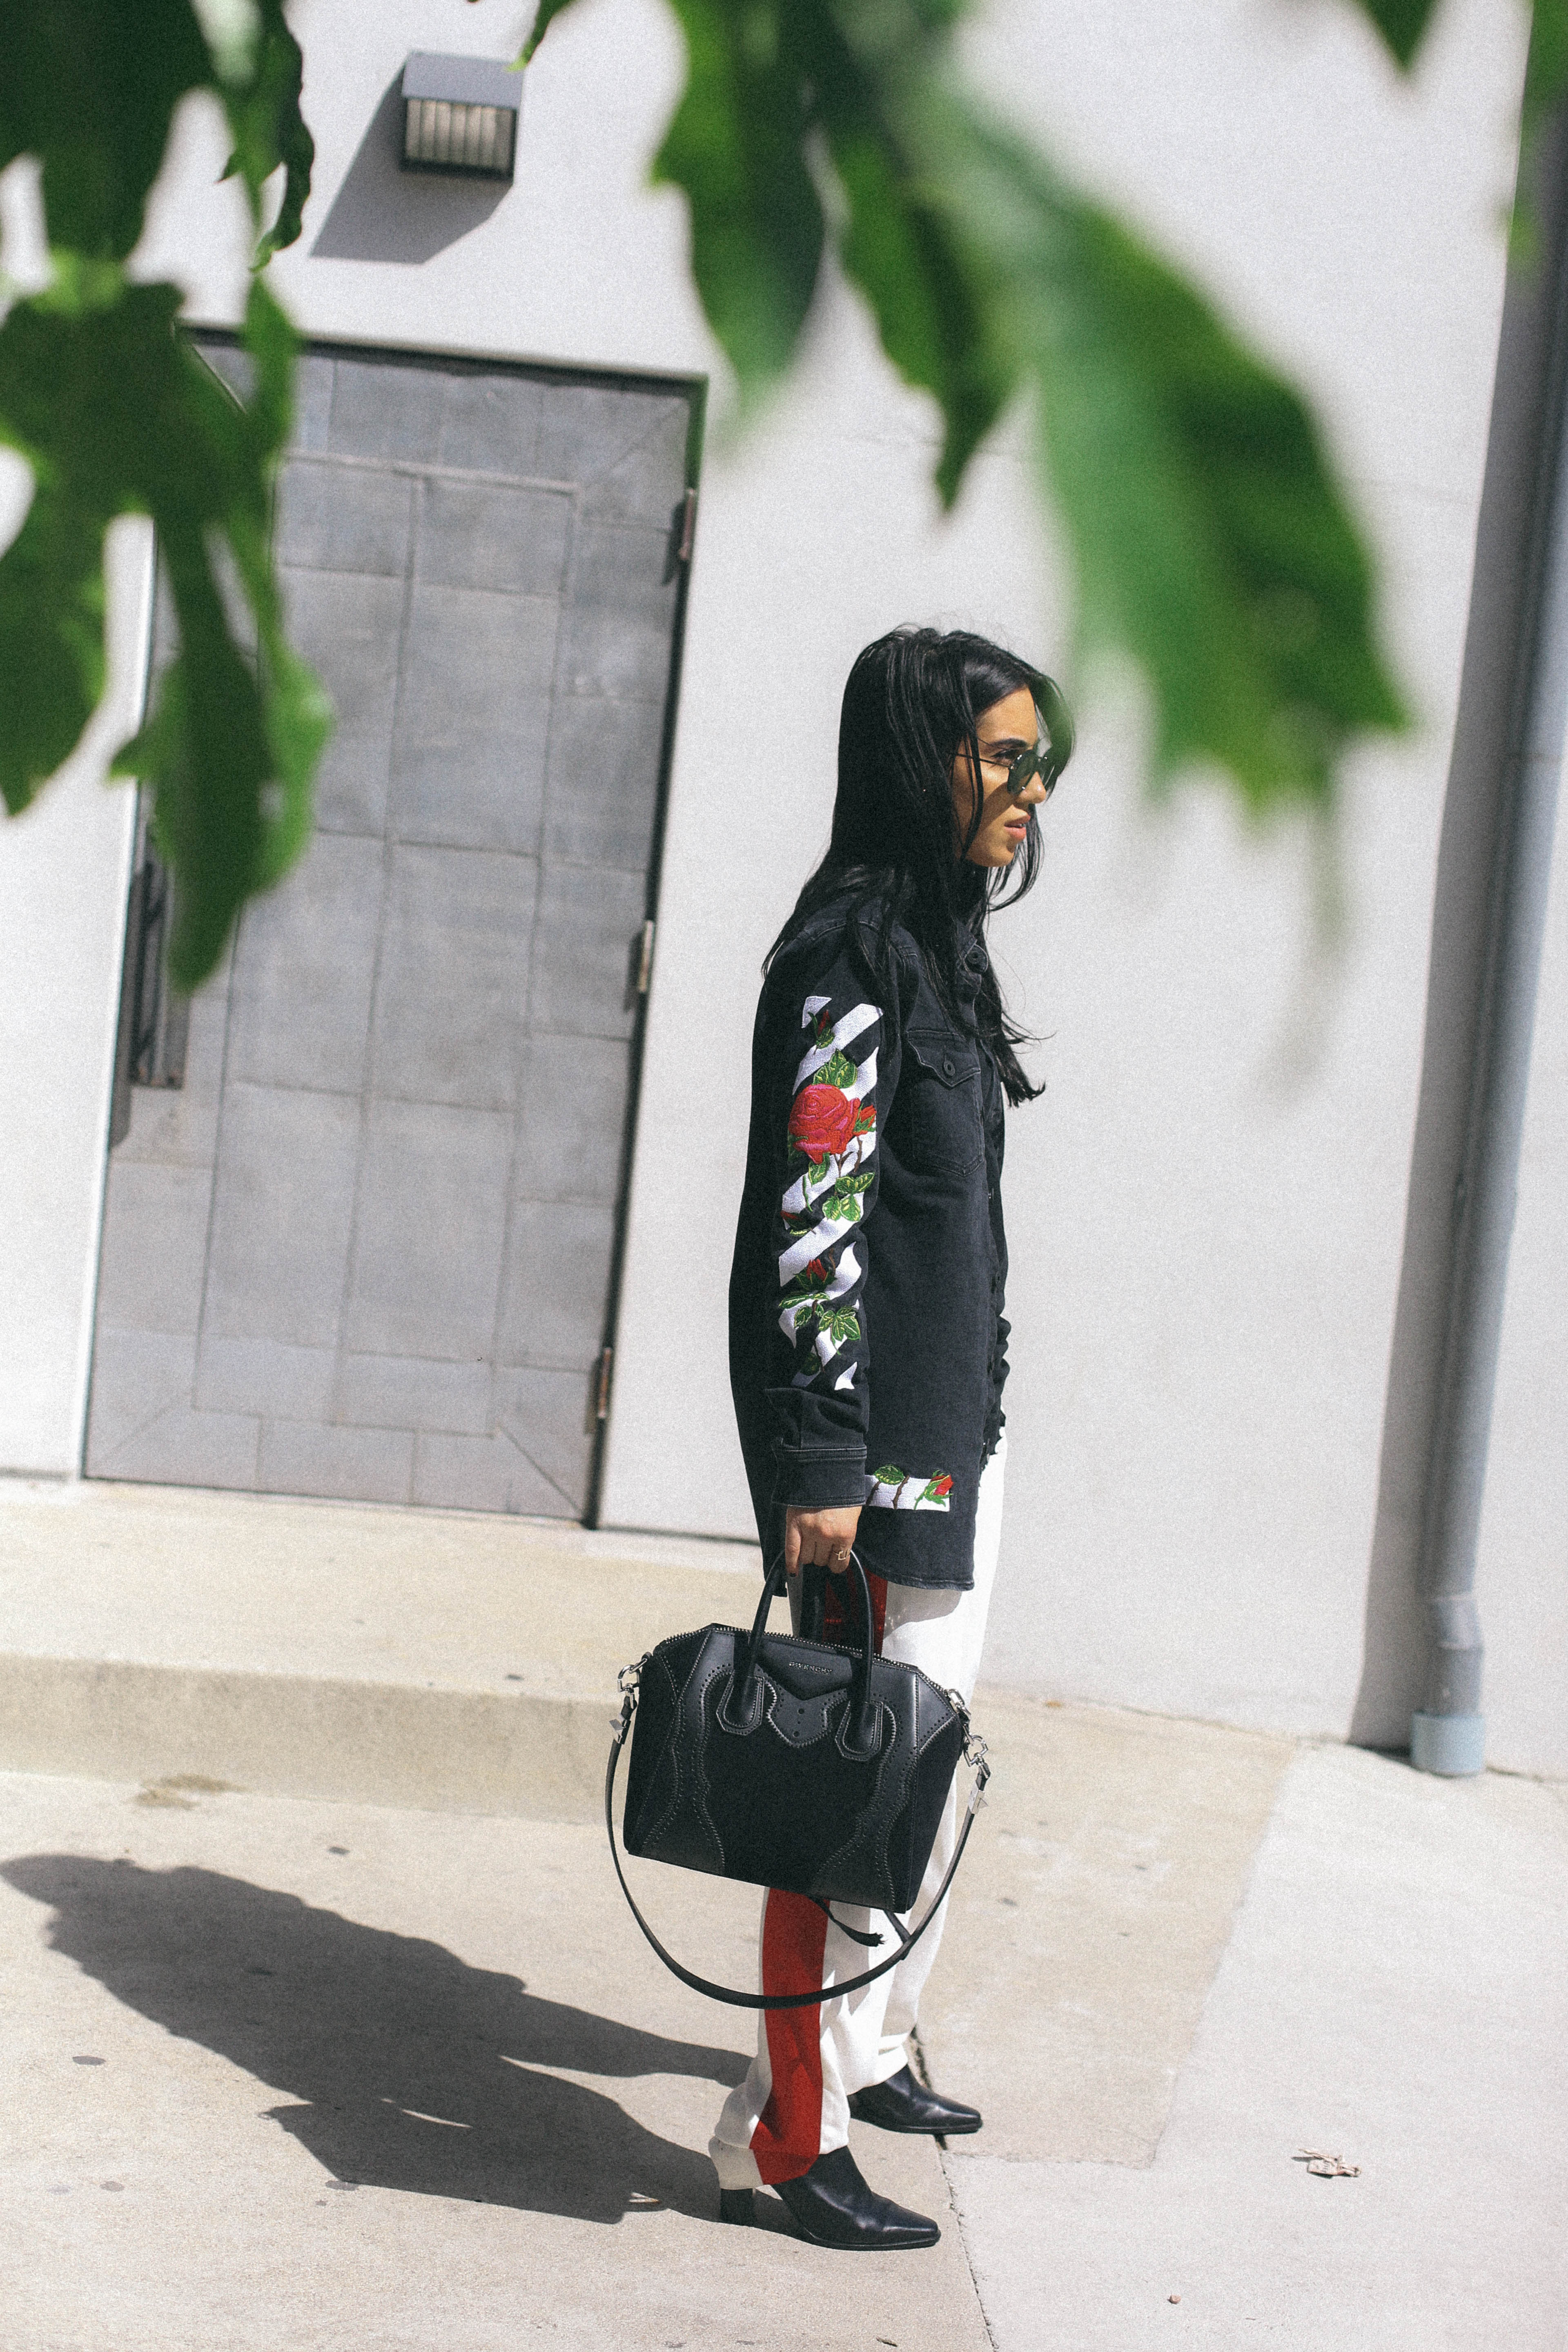 LA Blogger Tania Sarin in offwhite denim jacket and givenchy bag